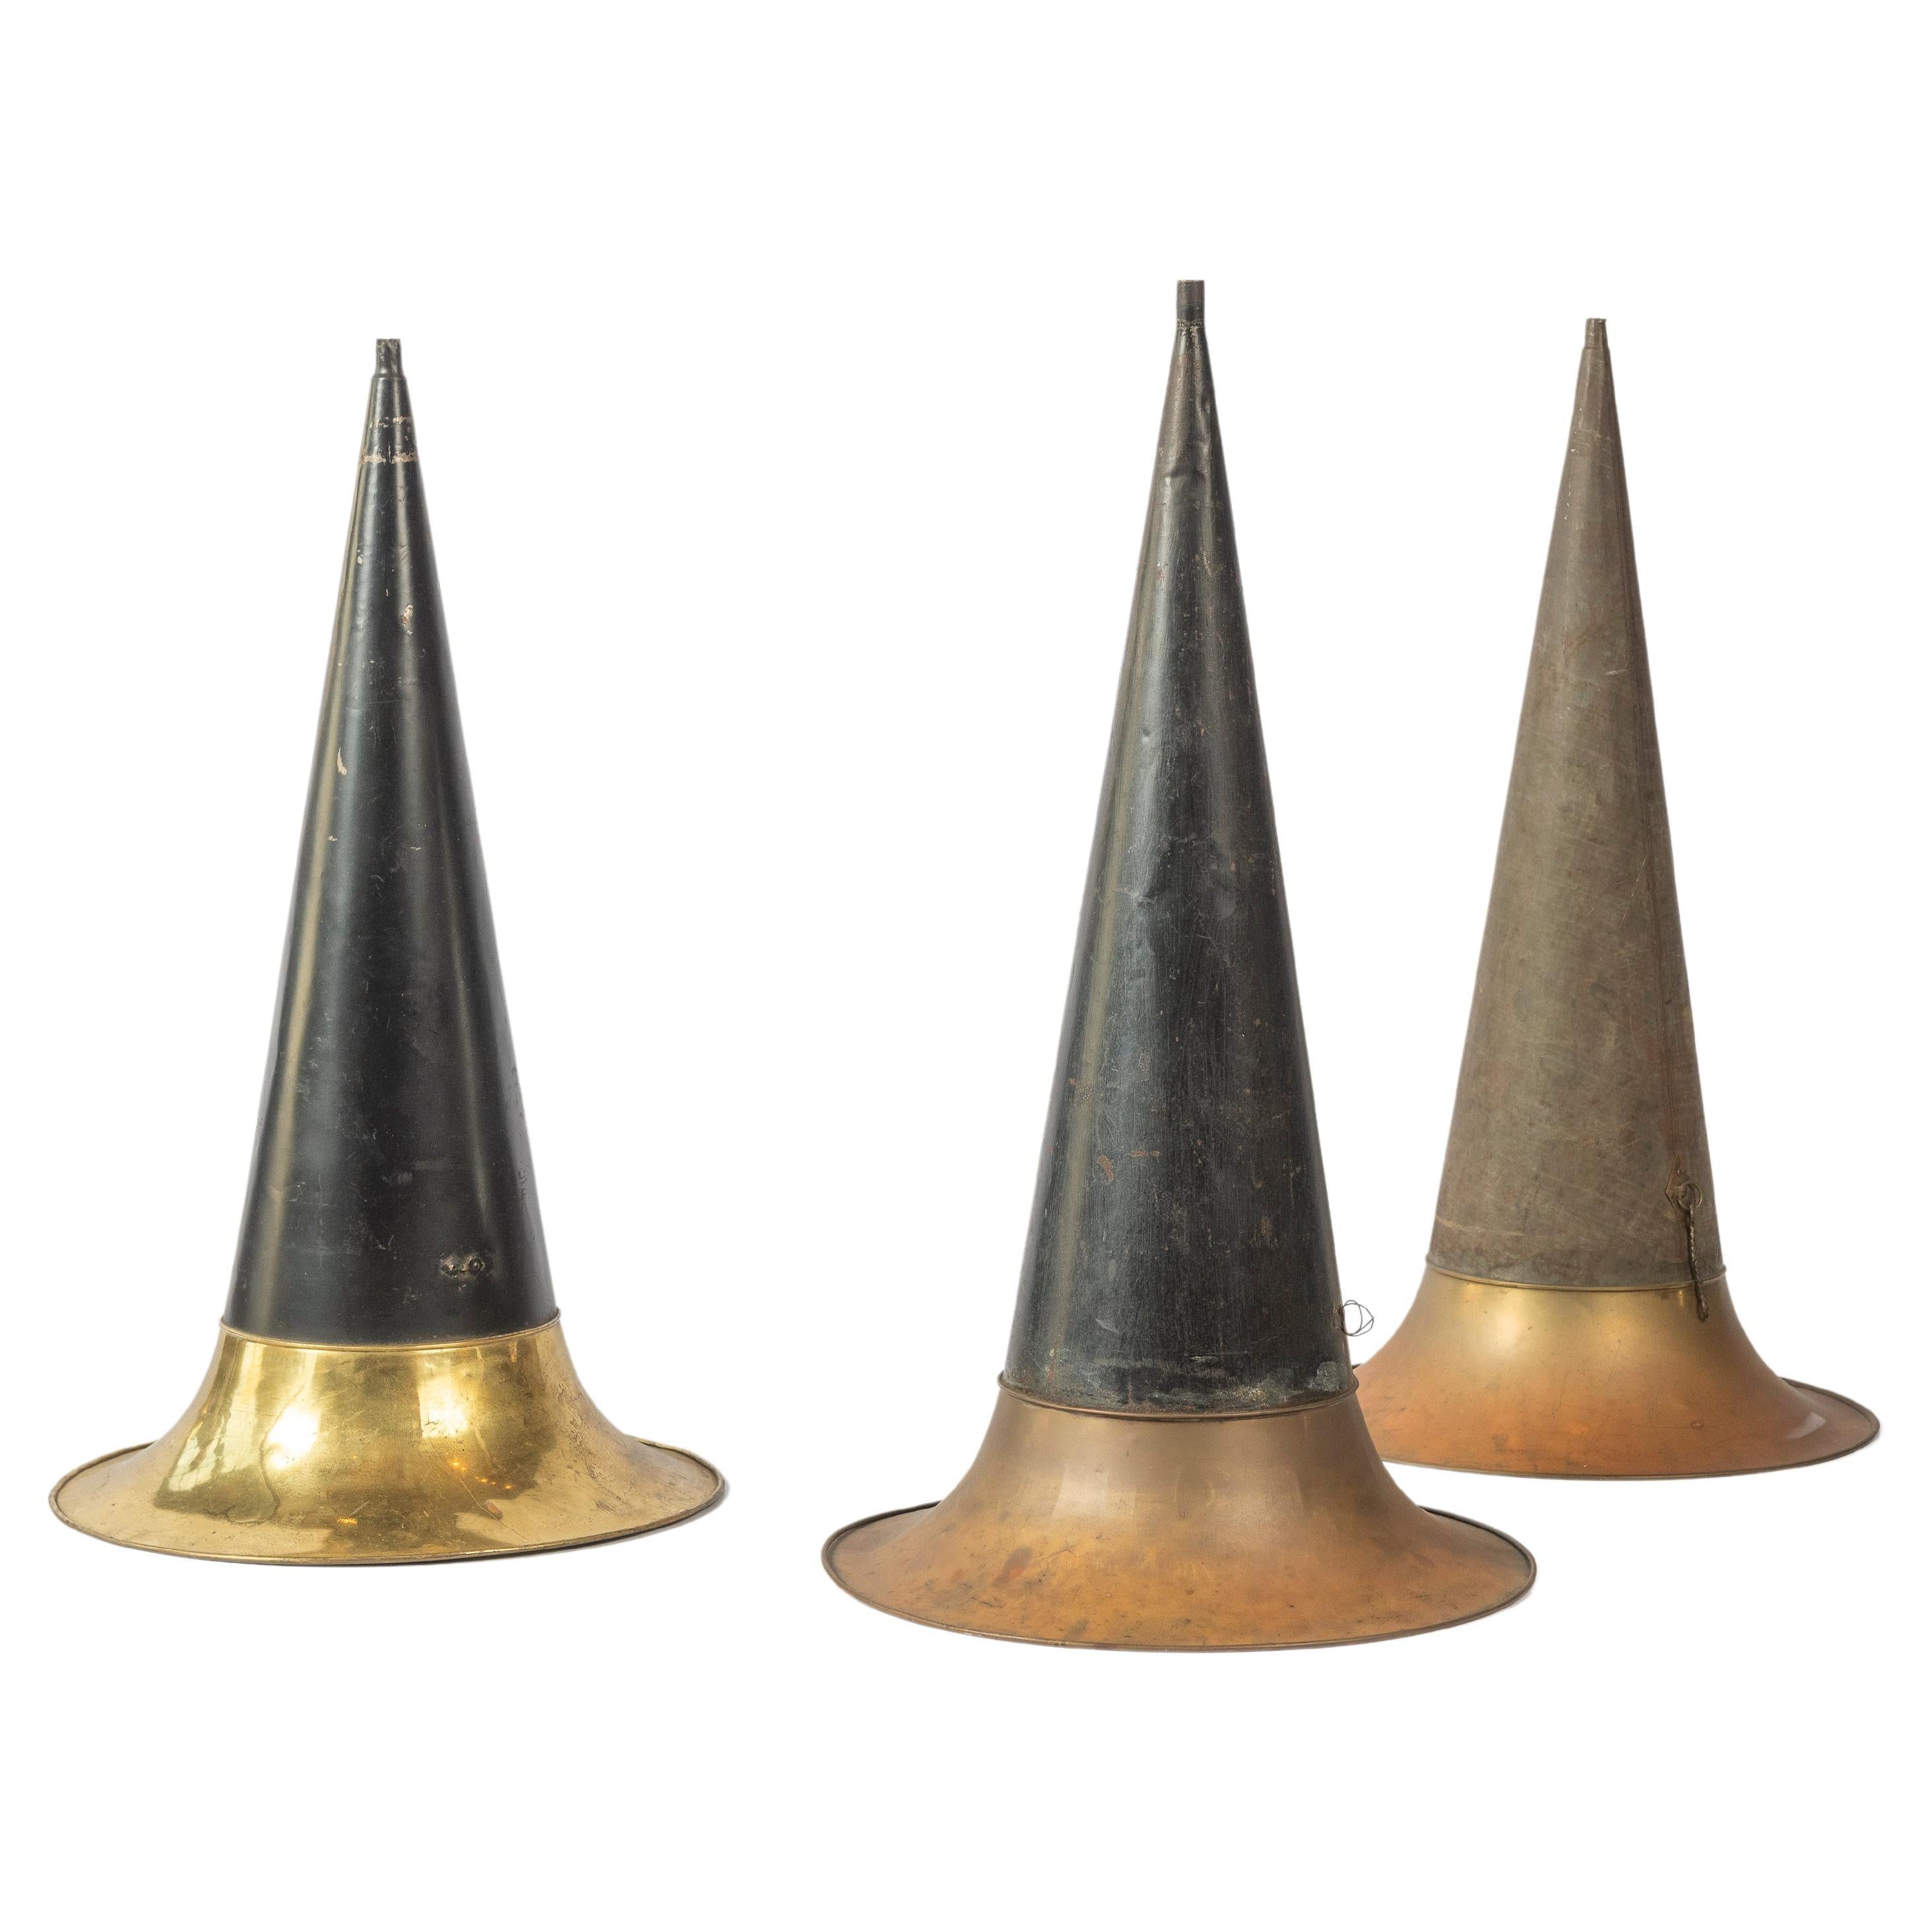 Three Antique Victrola Phonograph Horns  For Sale